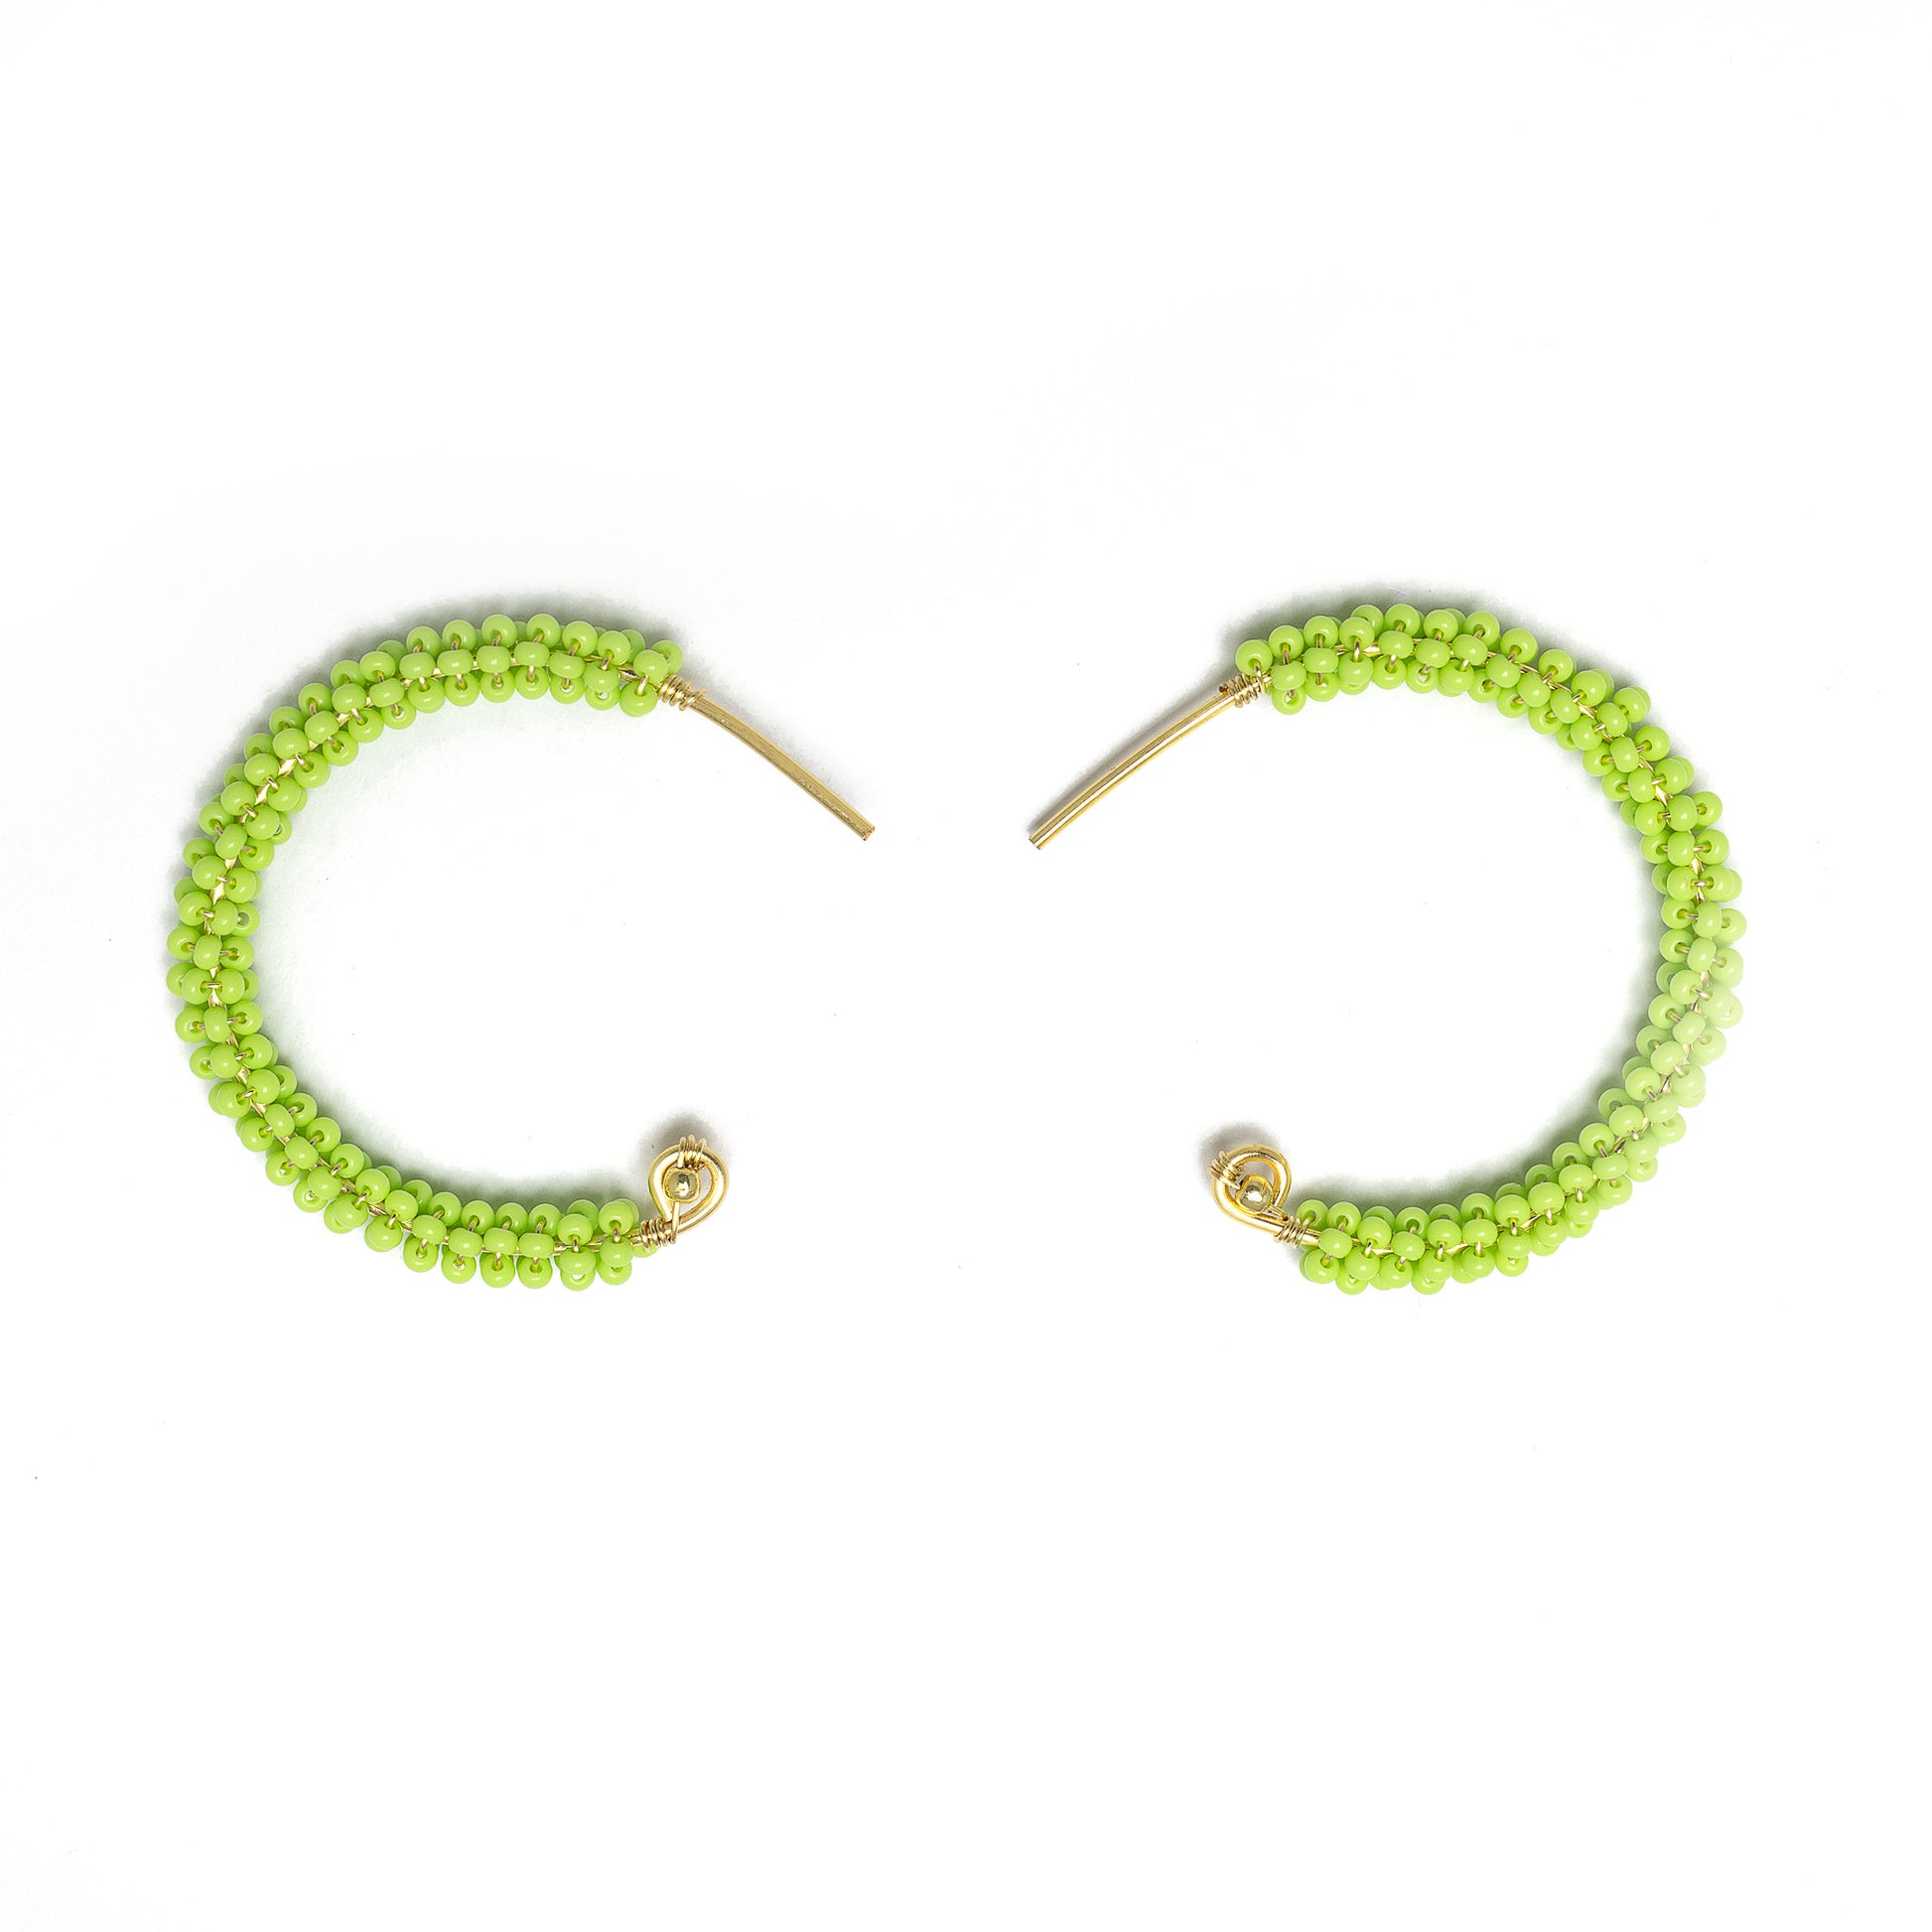 Florence gold Hoop Earrings are 1.5 inches long, Gold and Lime Green Earrings. Wire Wrapped Earrings. Lightweight and comfortable earrings. Handmade for women. Open hoop earrings.